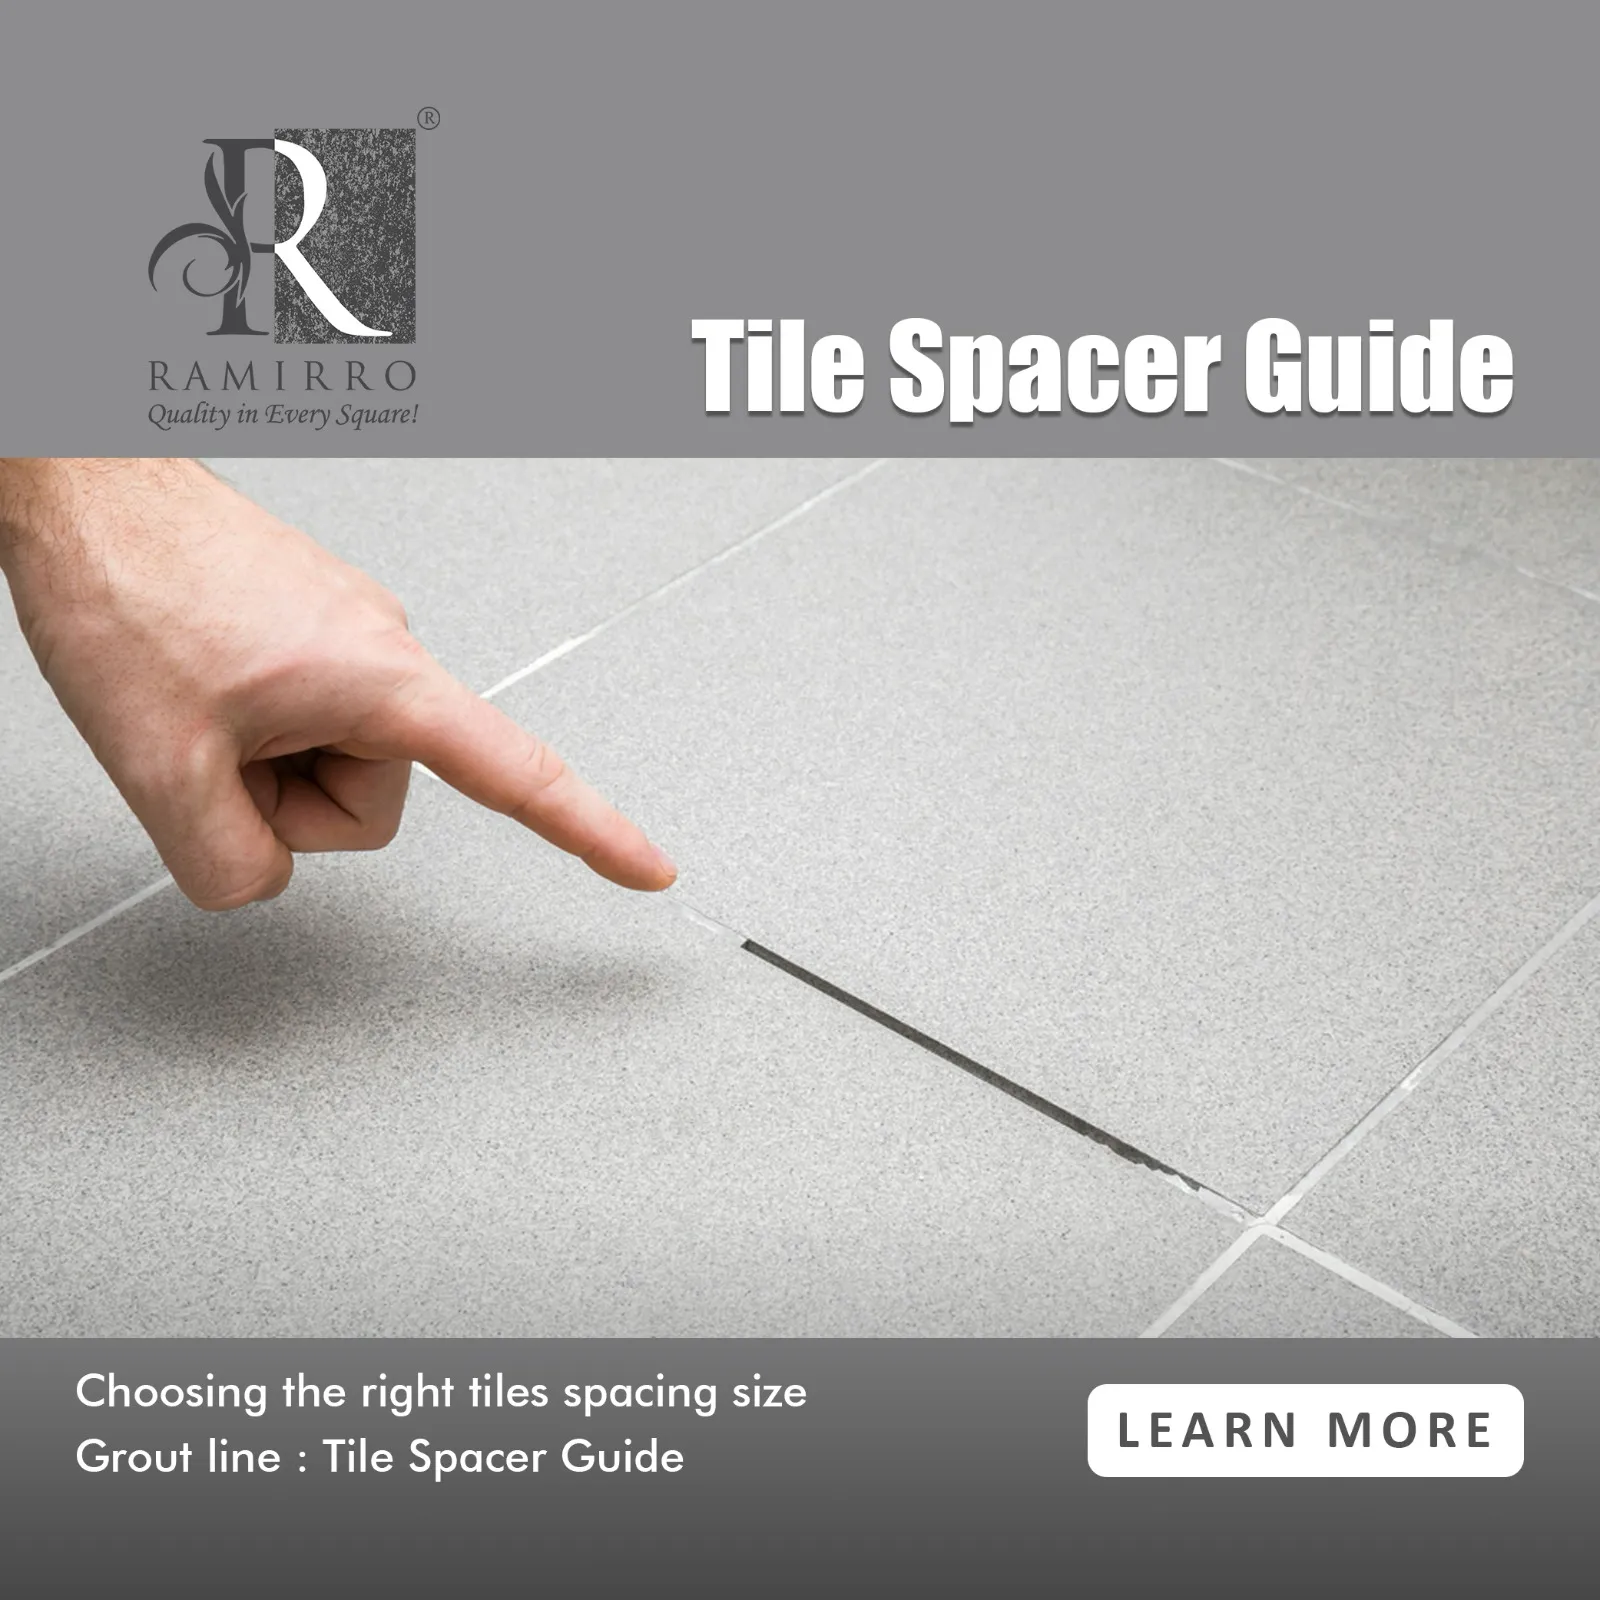 Choosing the Right Tile Spacing Size Grout line: Tile spacer Guide - Ramirro